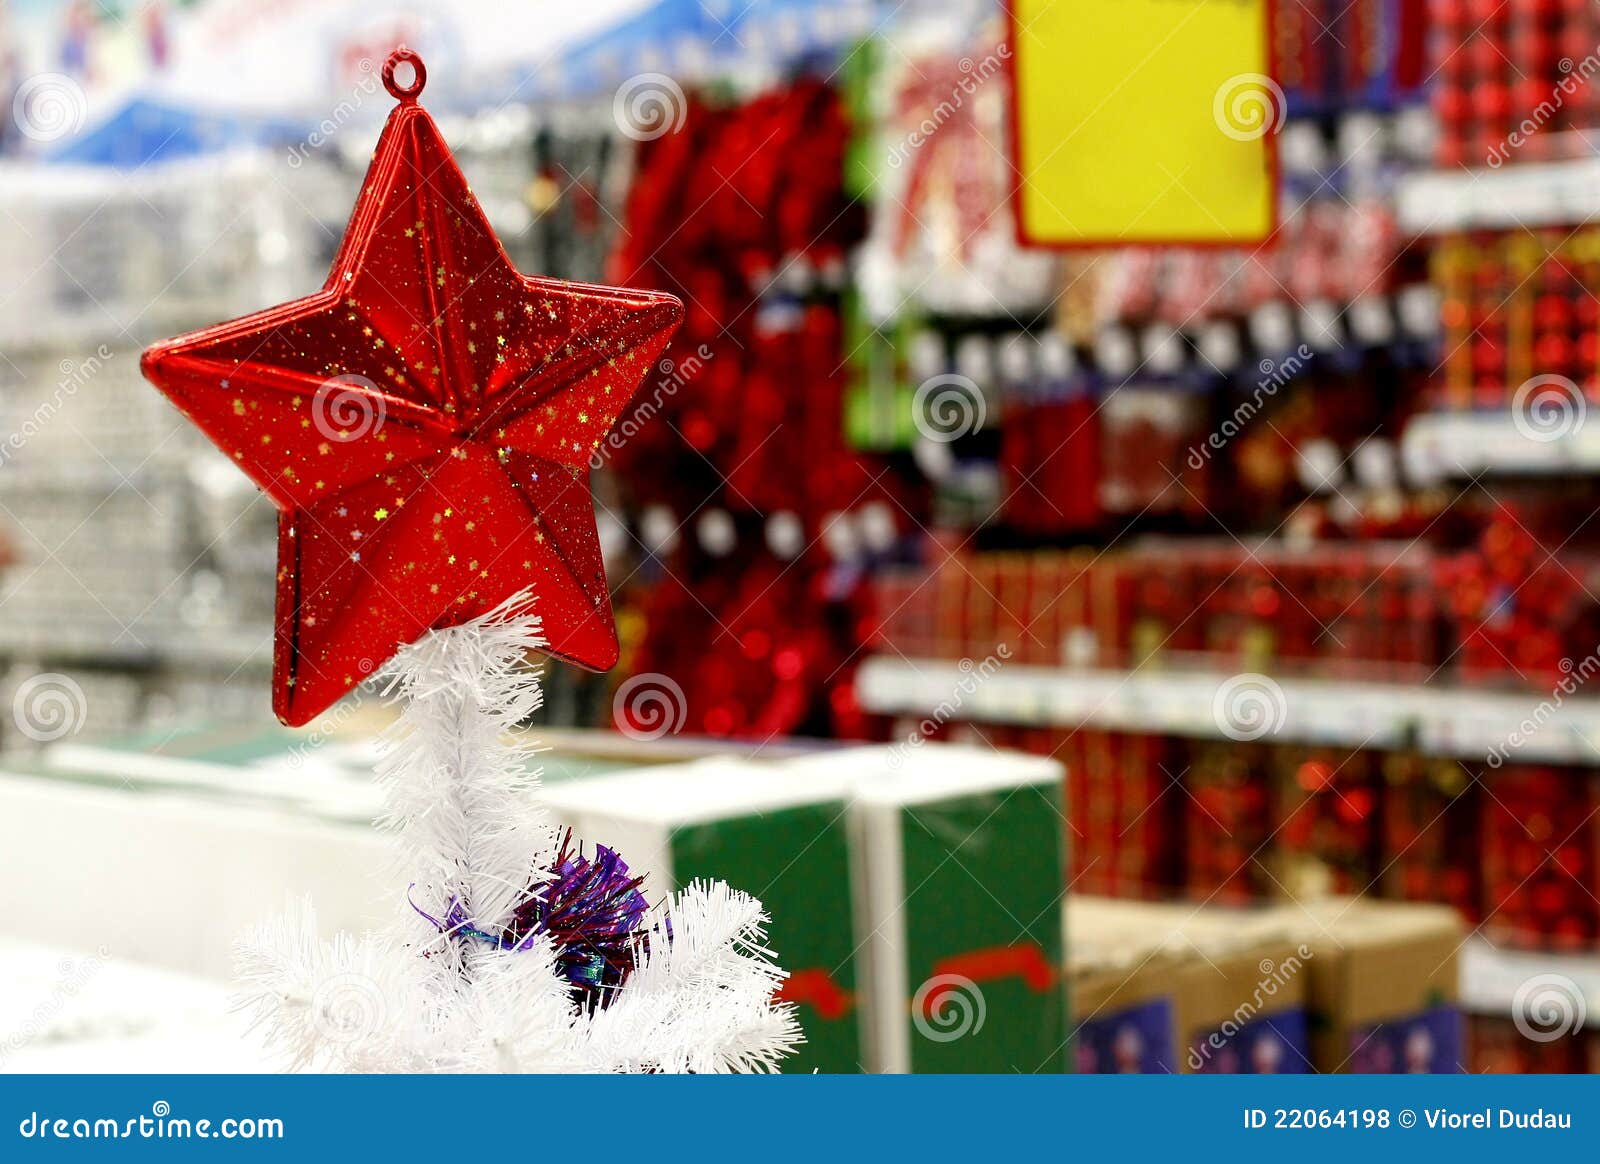 Christmas decorations shop stock photo. Image of gift  22064198